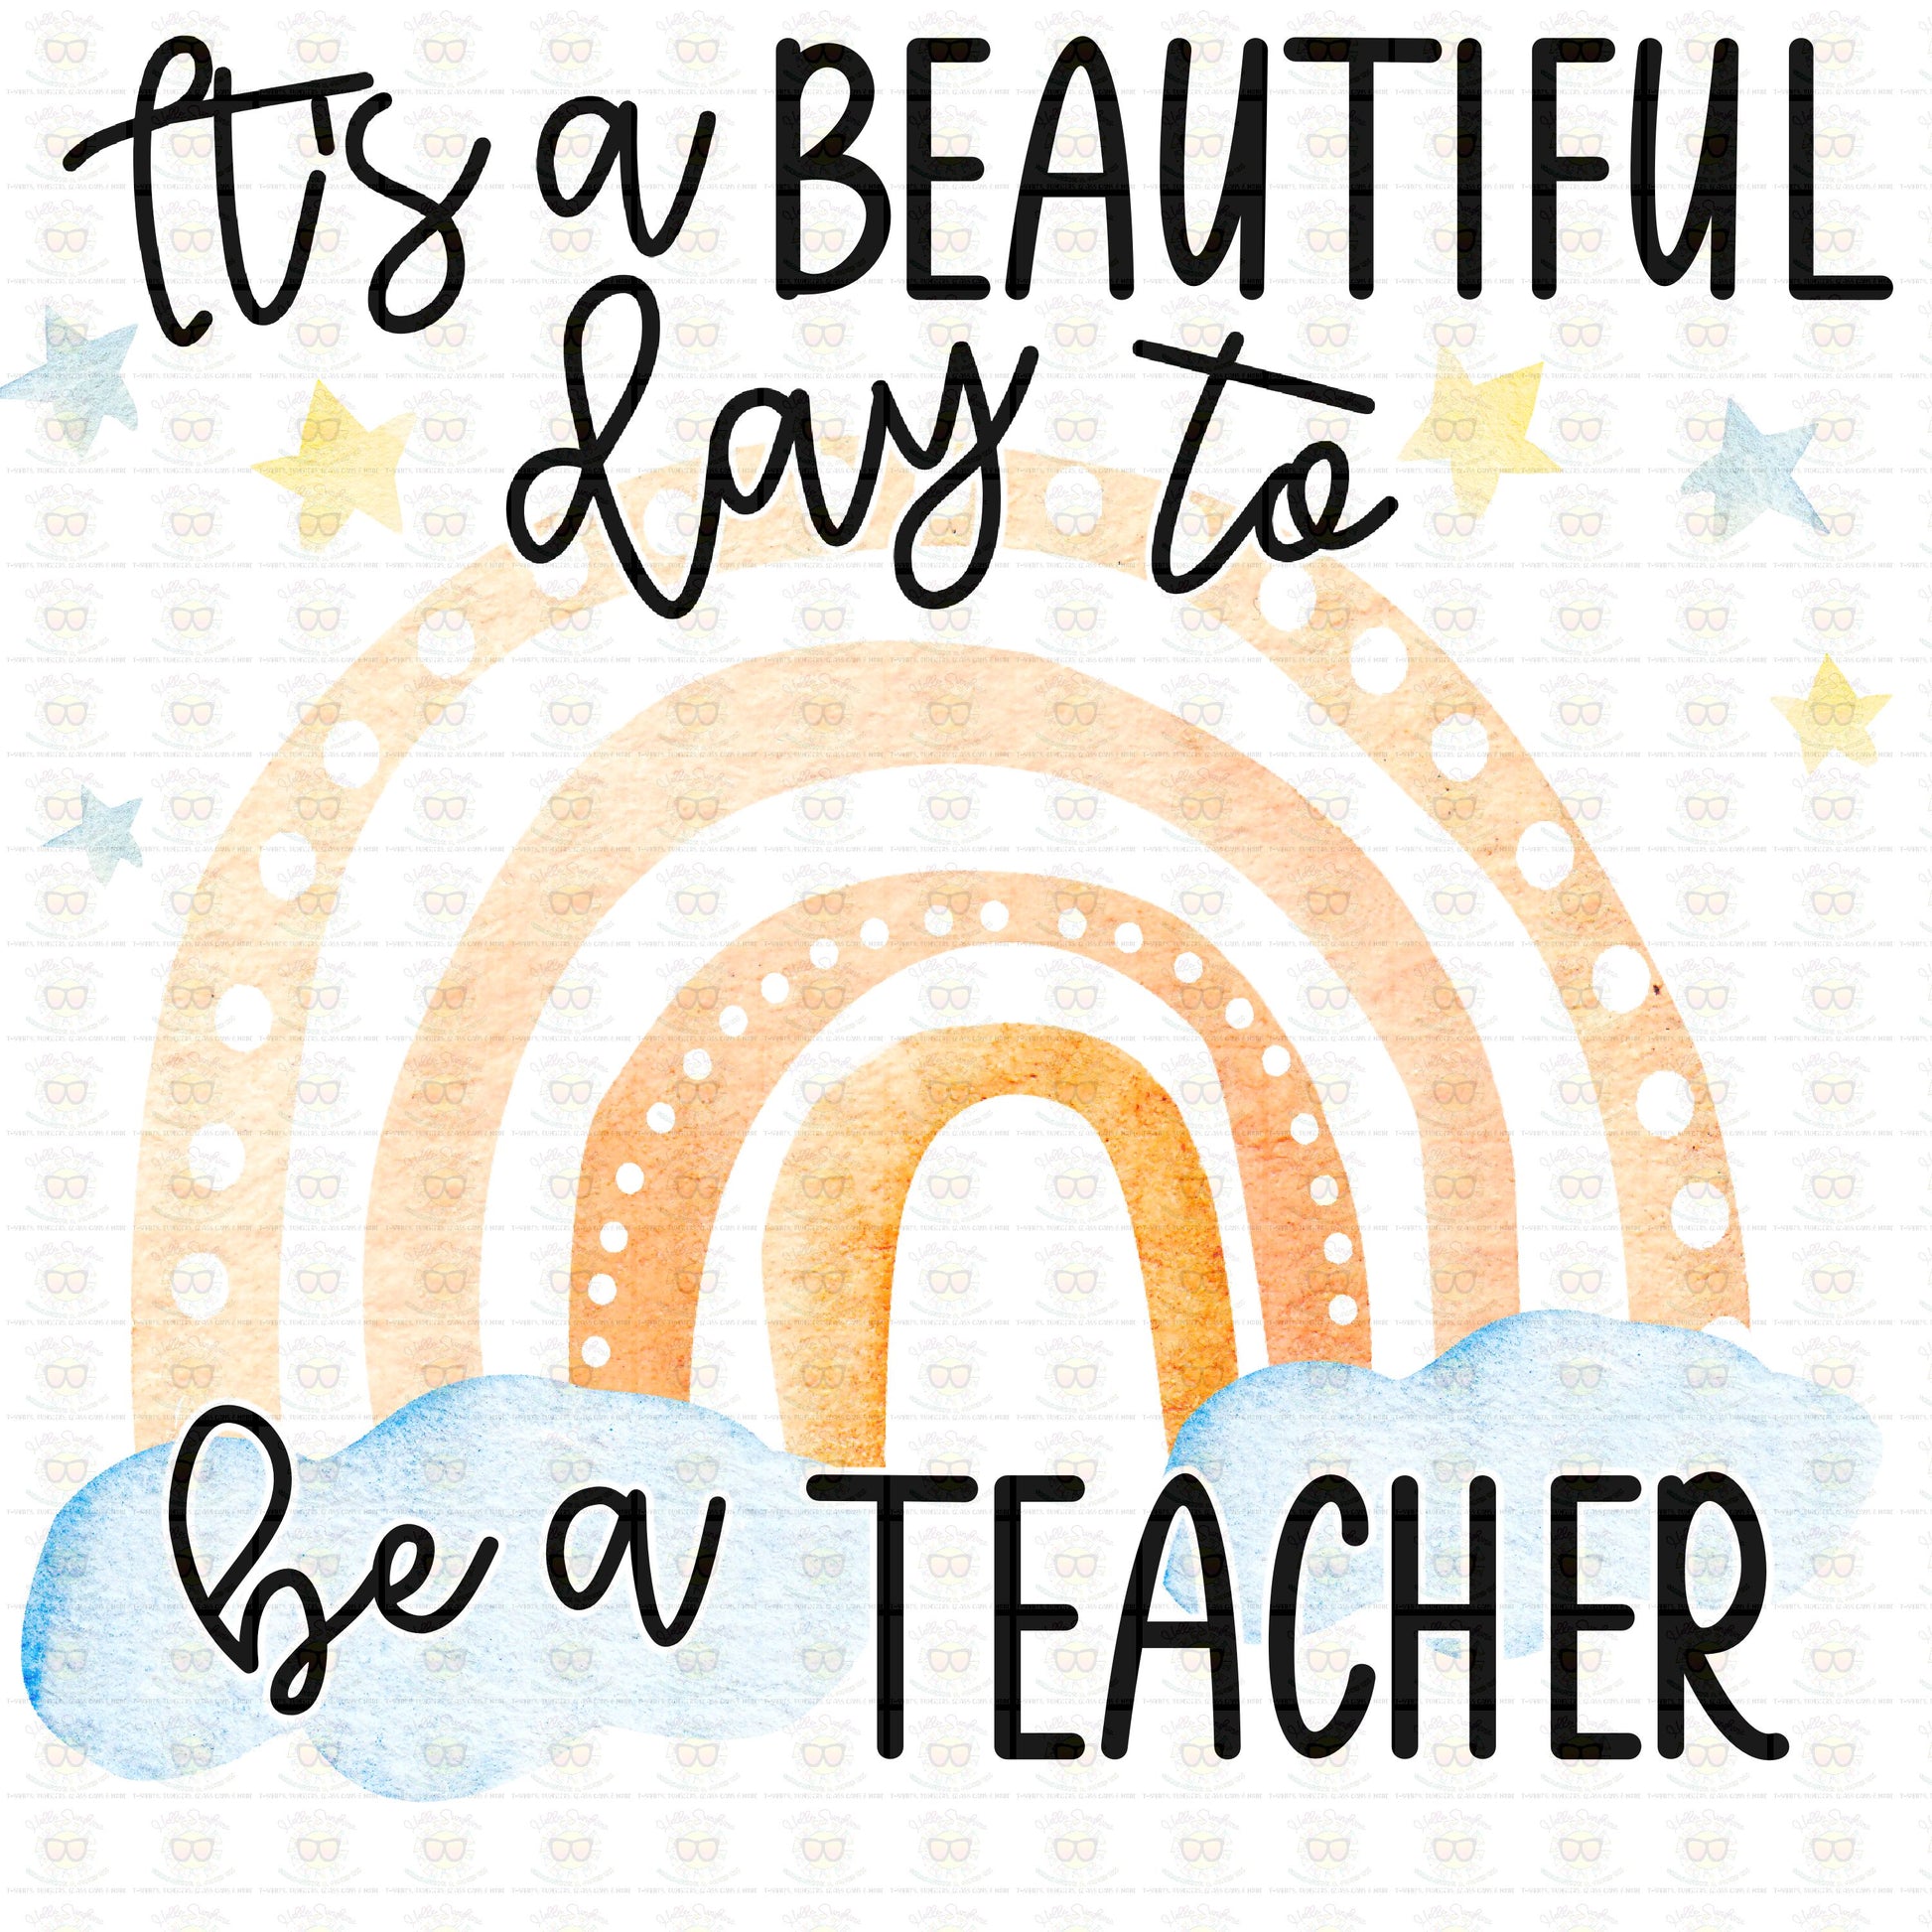 It's a Beautiful Day to be a Teacher